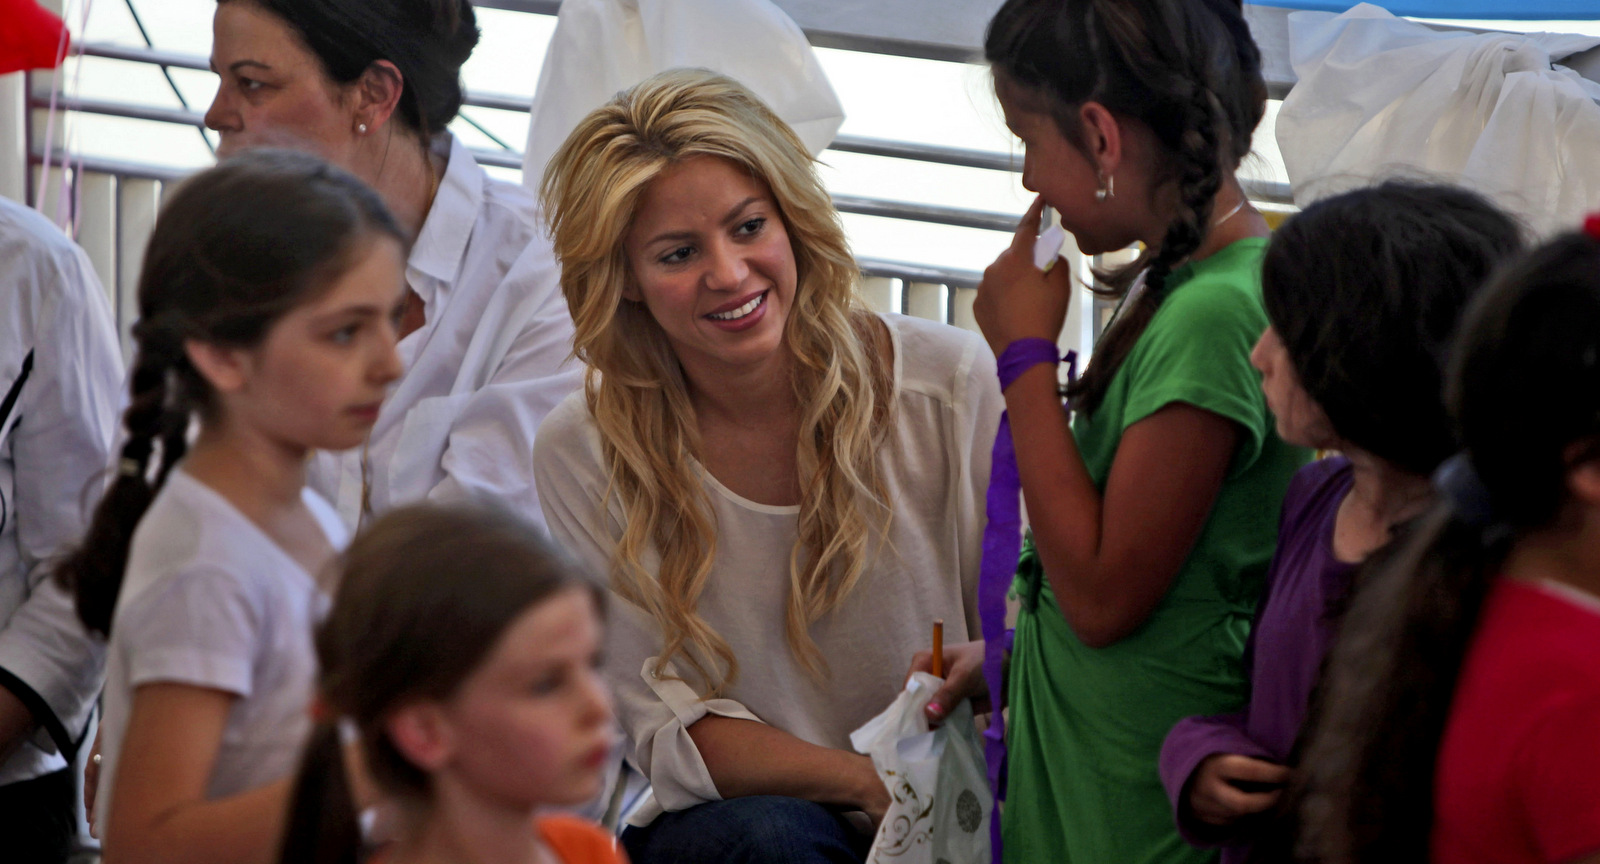 Colombian singer Shakira, center, visits a school in Jerusalem, Tuesday, June 21, 2011. Shakira is attending the Presidential Conference, sponsored by Israeli President Shimon Peres and will take part in panel alongside comedian Sarah Silverman. (AP Photo/Tara Todras-Whitehill)